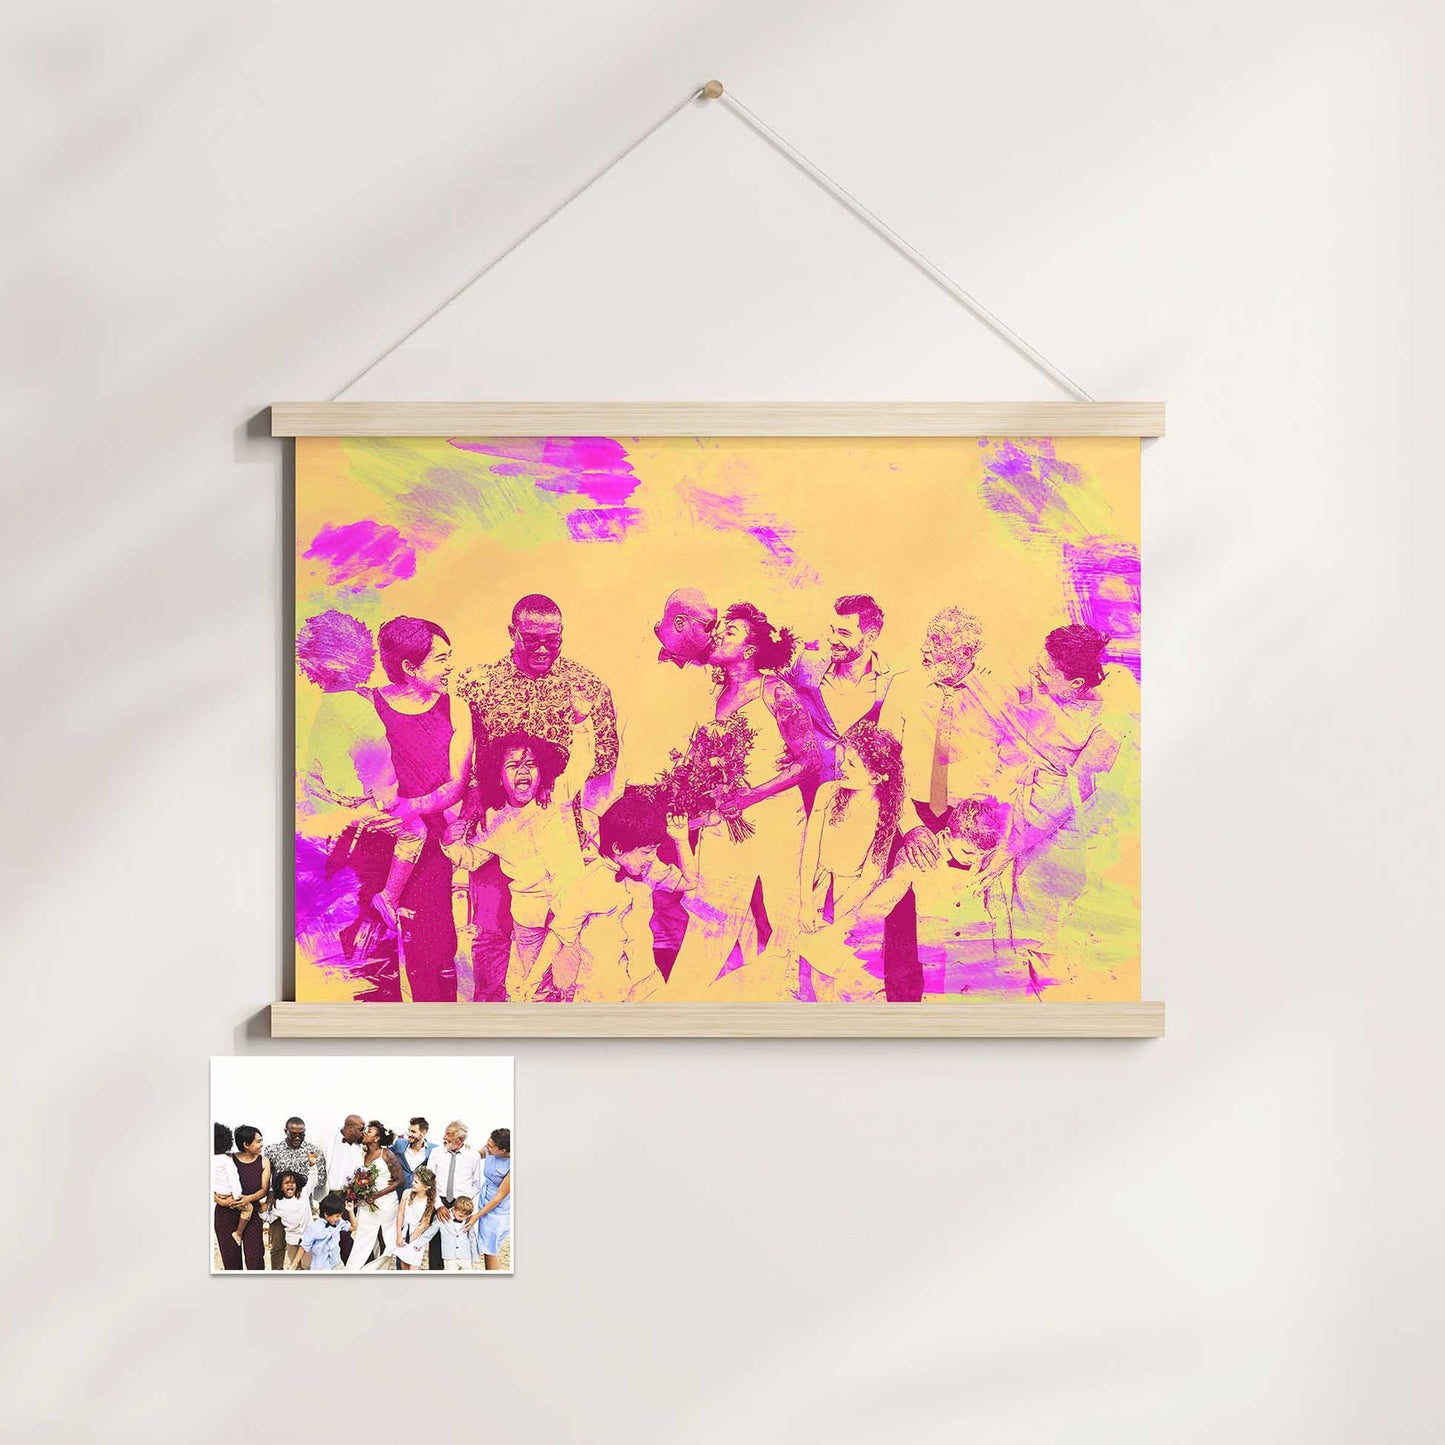 Transform your cherished memories into art with our Personalised Pink & Yellow Watercolor Poster Hanger. The realistic and classic watercolor effect creates a unique texture, while the vibrant pink and yellow hues 